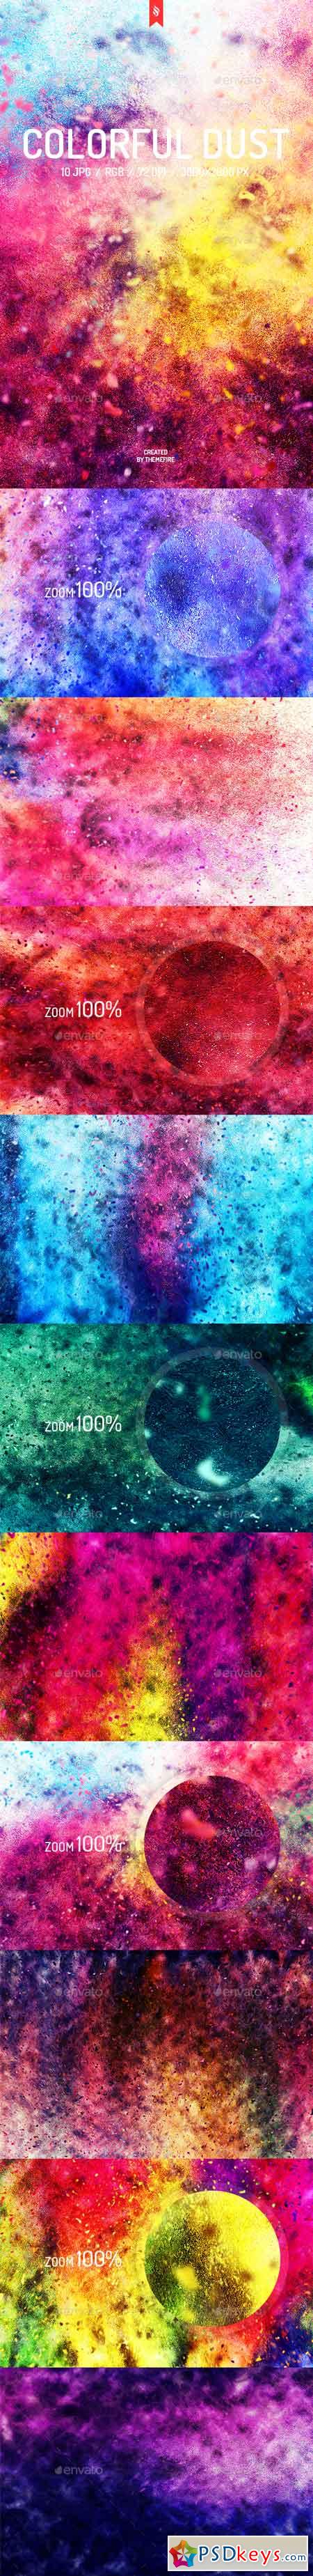 Colorful Dust Backgrounds 13945650